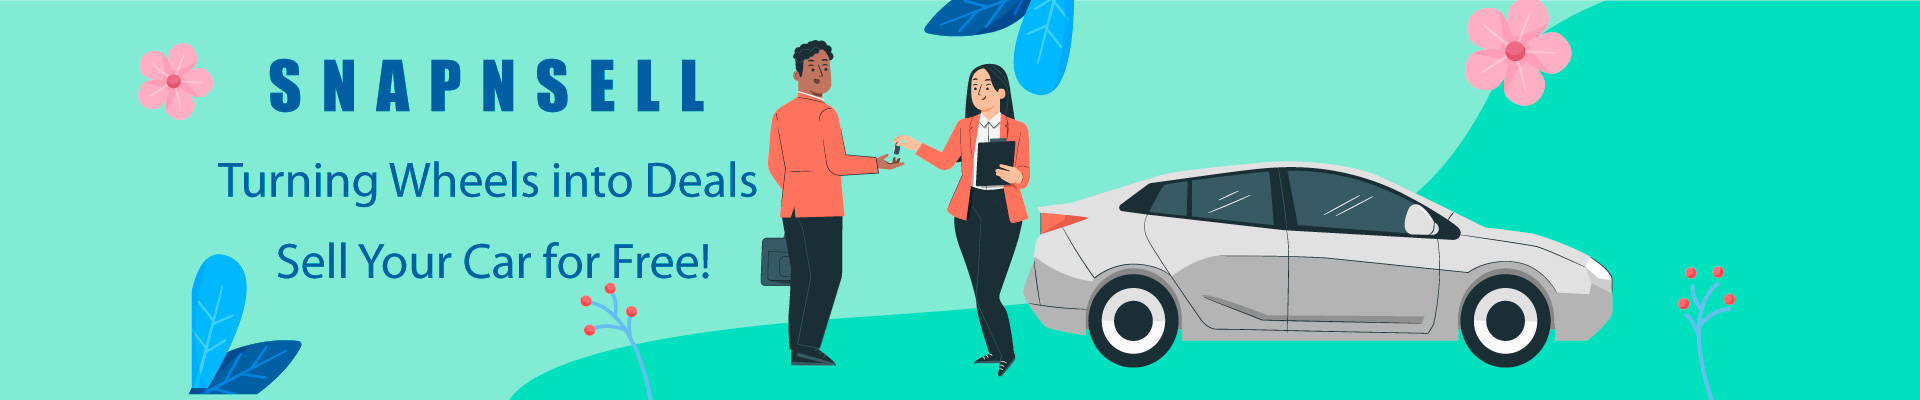 Turning Wheels into Deals, Sell Your Car for Free!